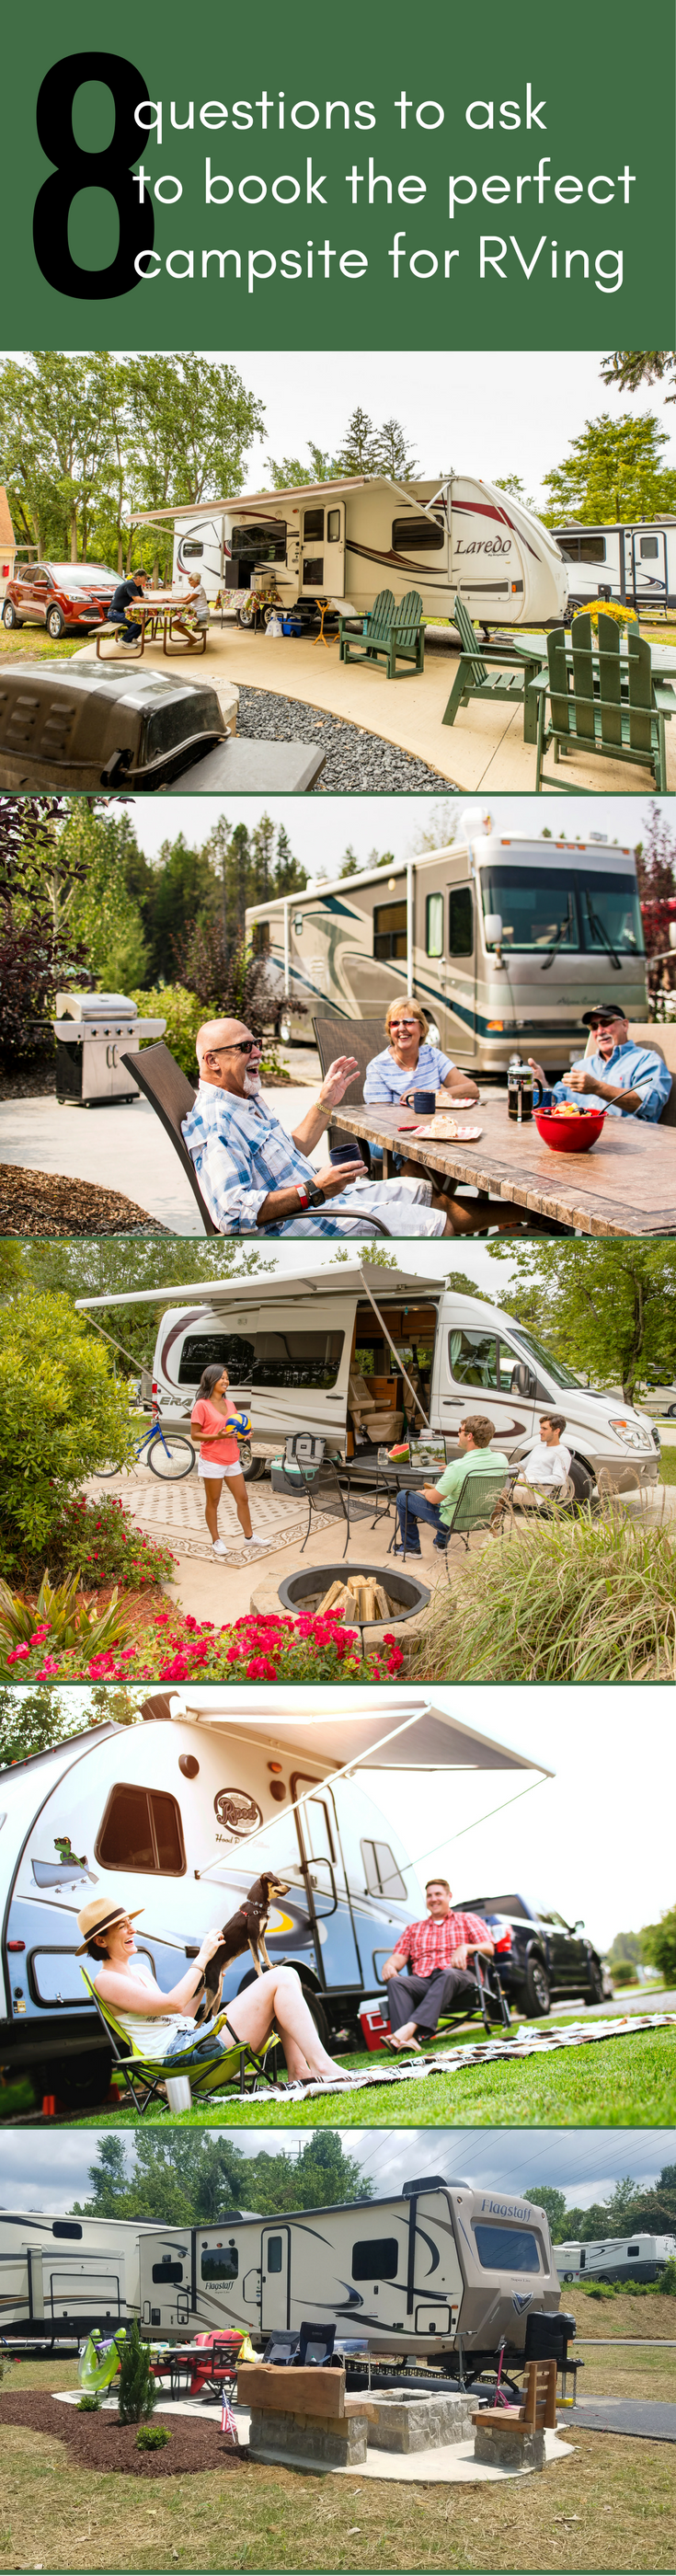 Find the perfect campsite for your next RV adventure is easy with these tips from our travel experts.